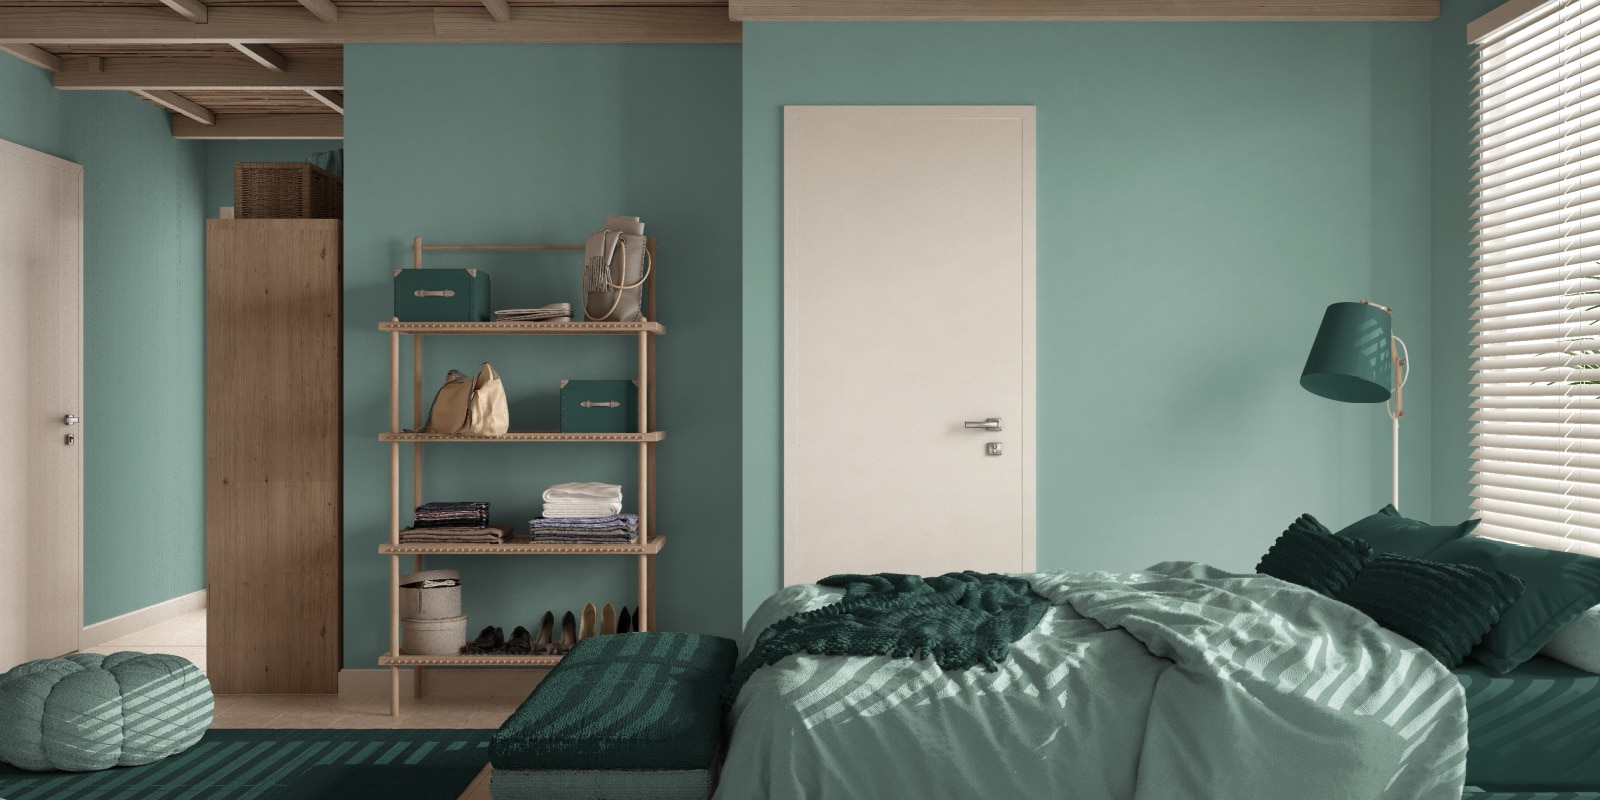 Cozy bedroom with teal colored walls and a white door